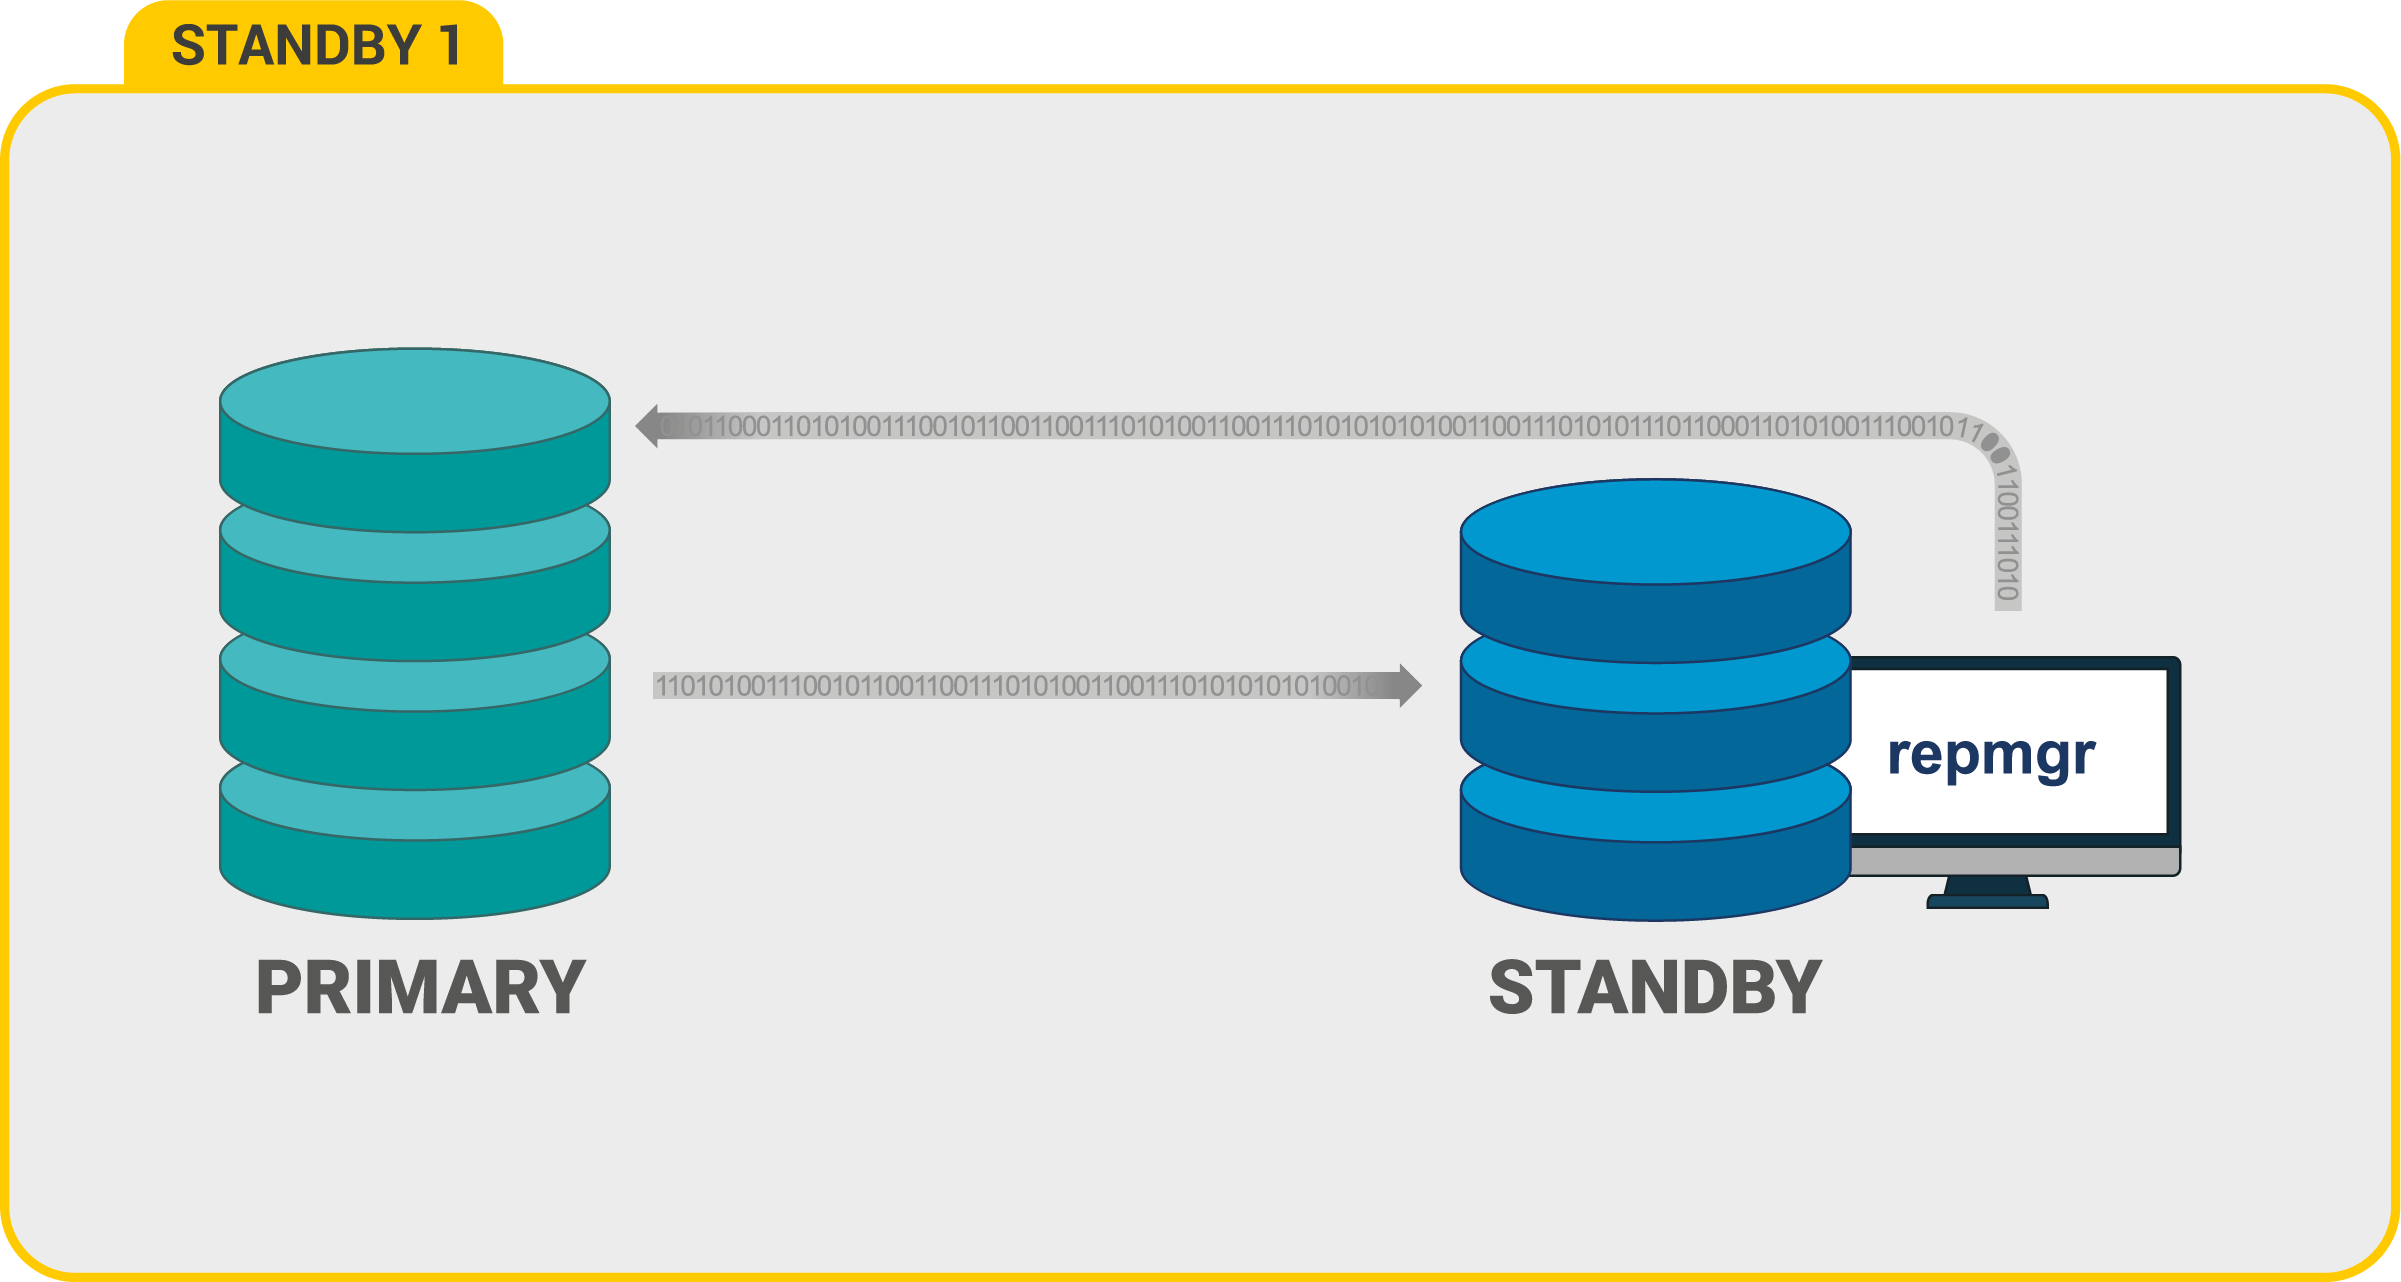 repmgr is a popular tool for PostgreSQL replication and failover management by 2ndQuadrant. One of its configurations in production databases includes 1 Primary + 1 Standby for failover in case the Primary node fails.